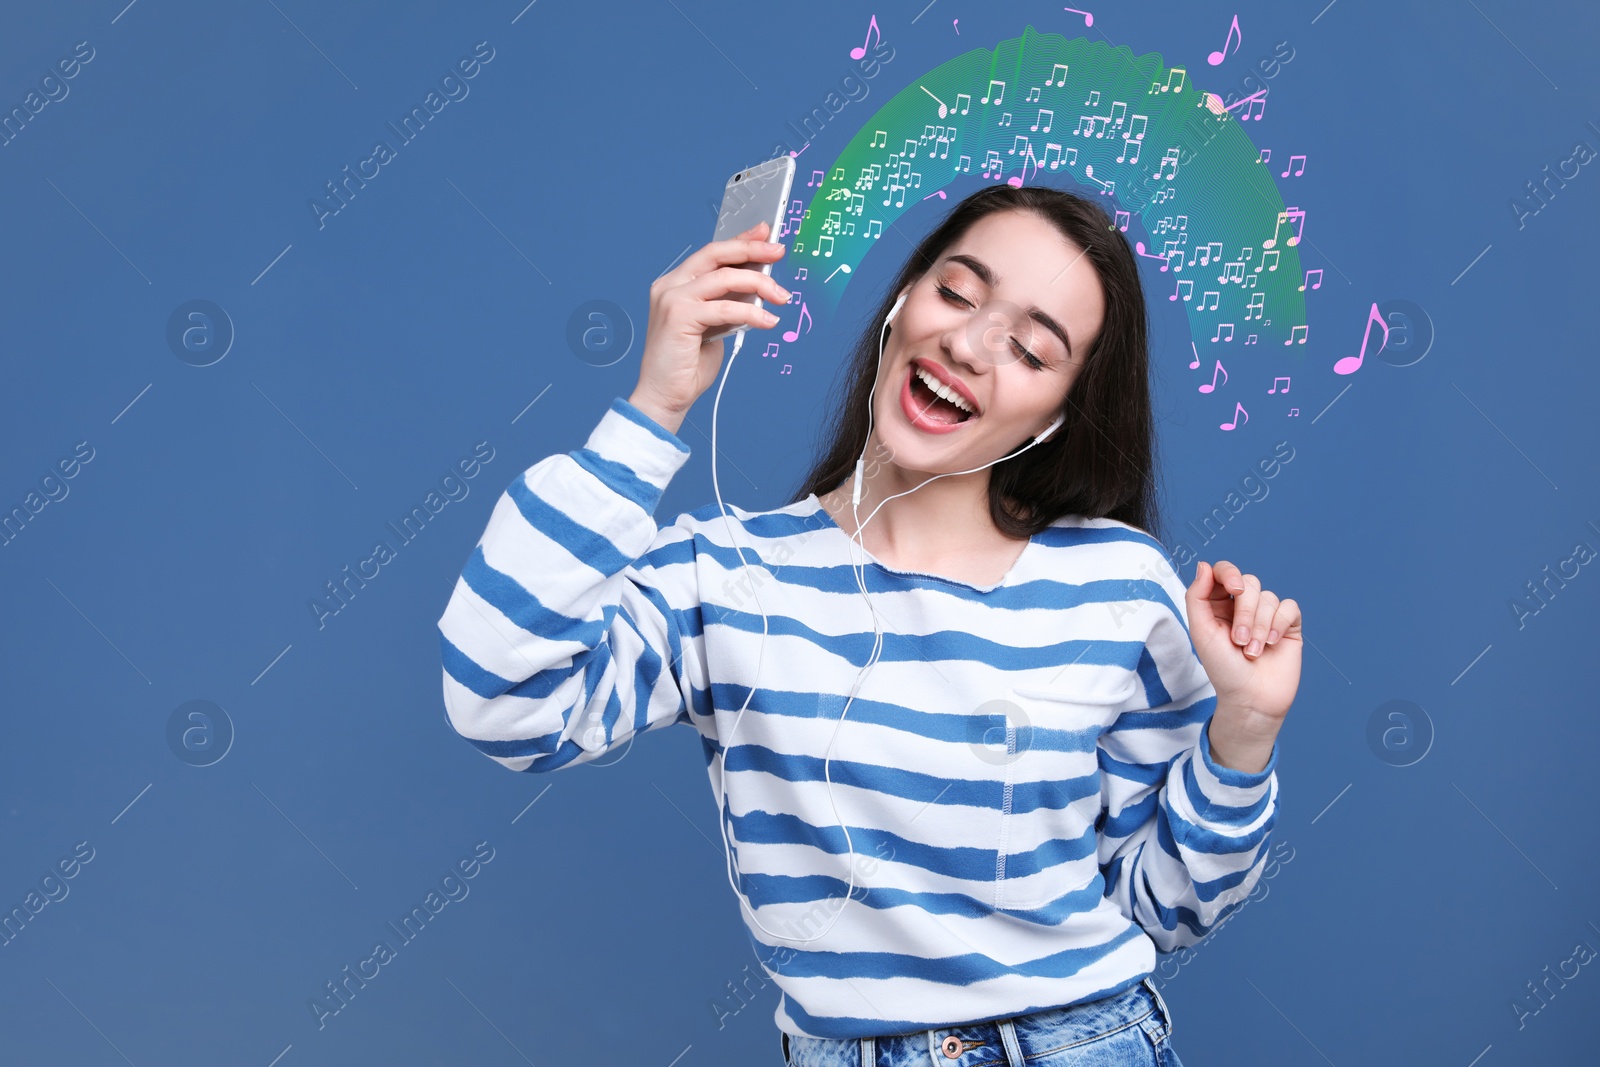 Image of Happy woman listening to music through headphones on blue background, space for text. Music notes illustrations flowing from gadget